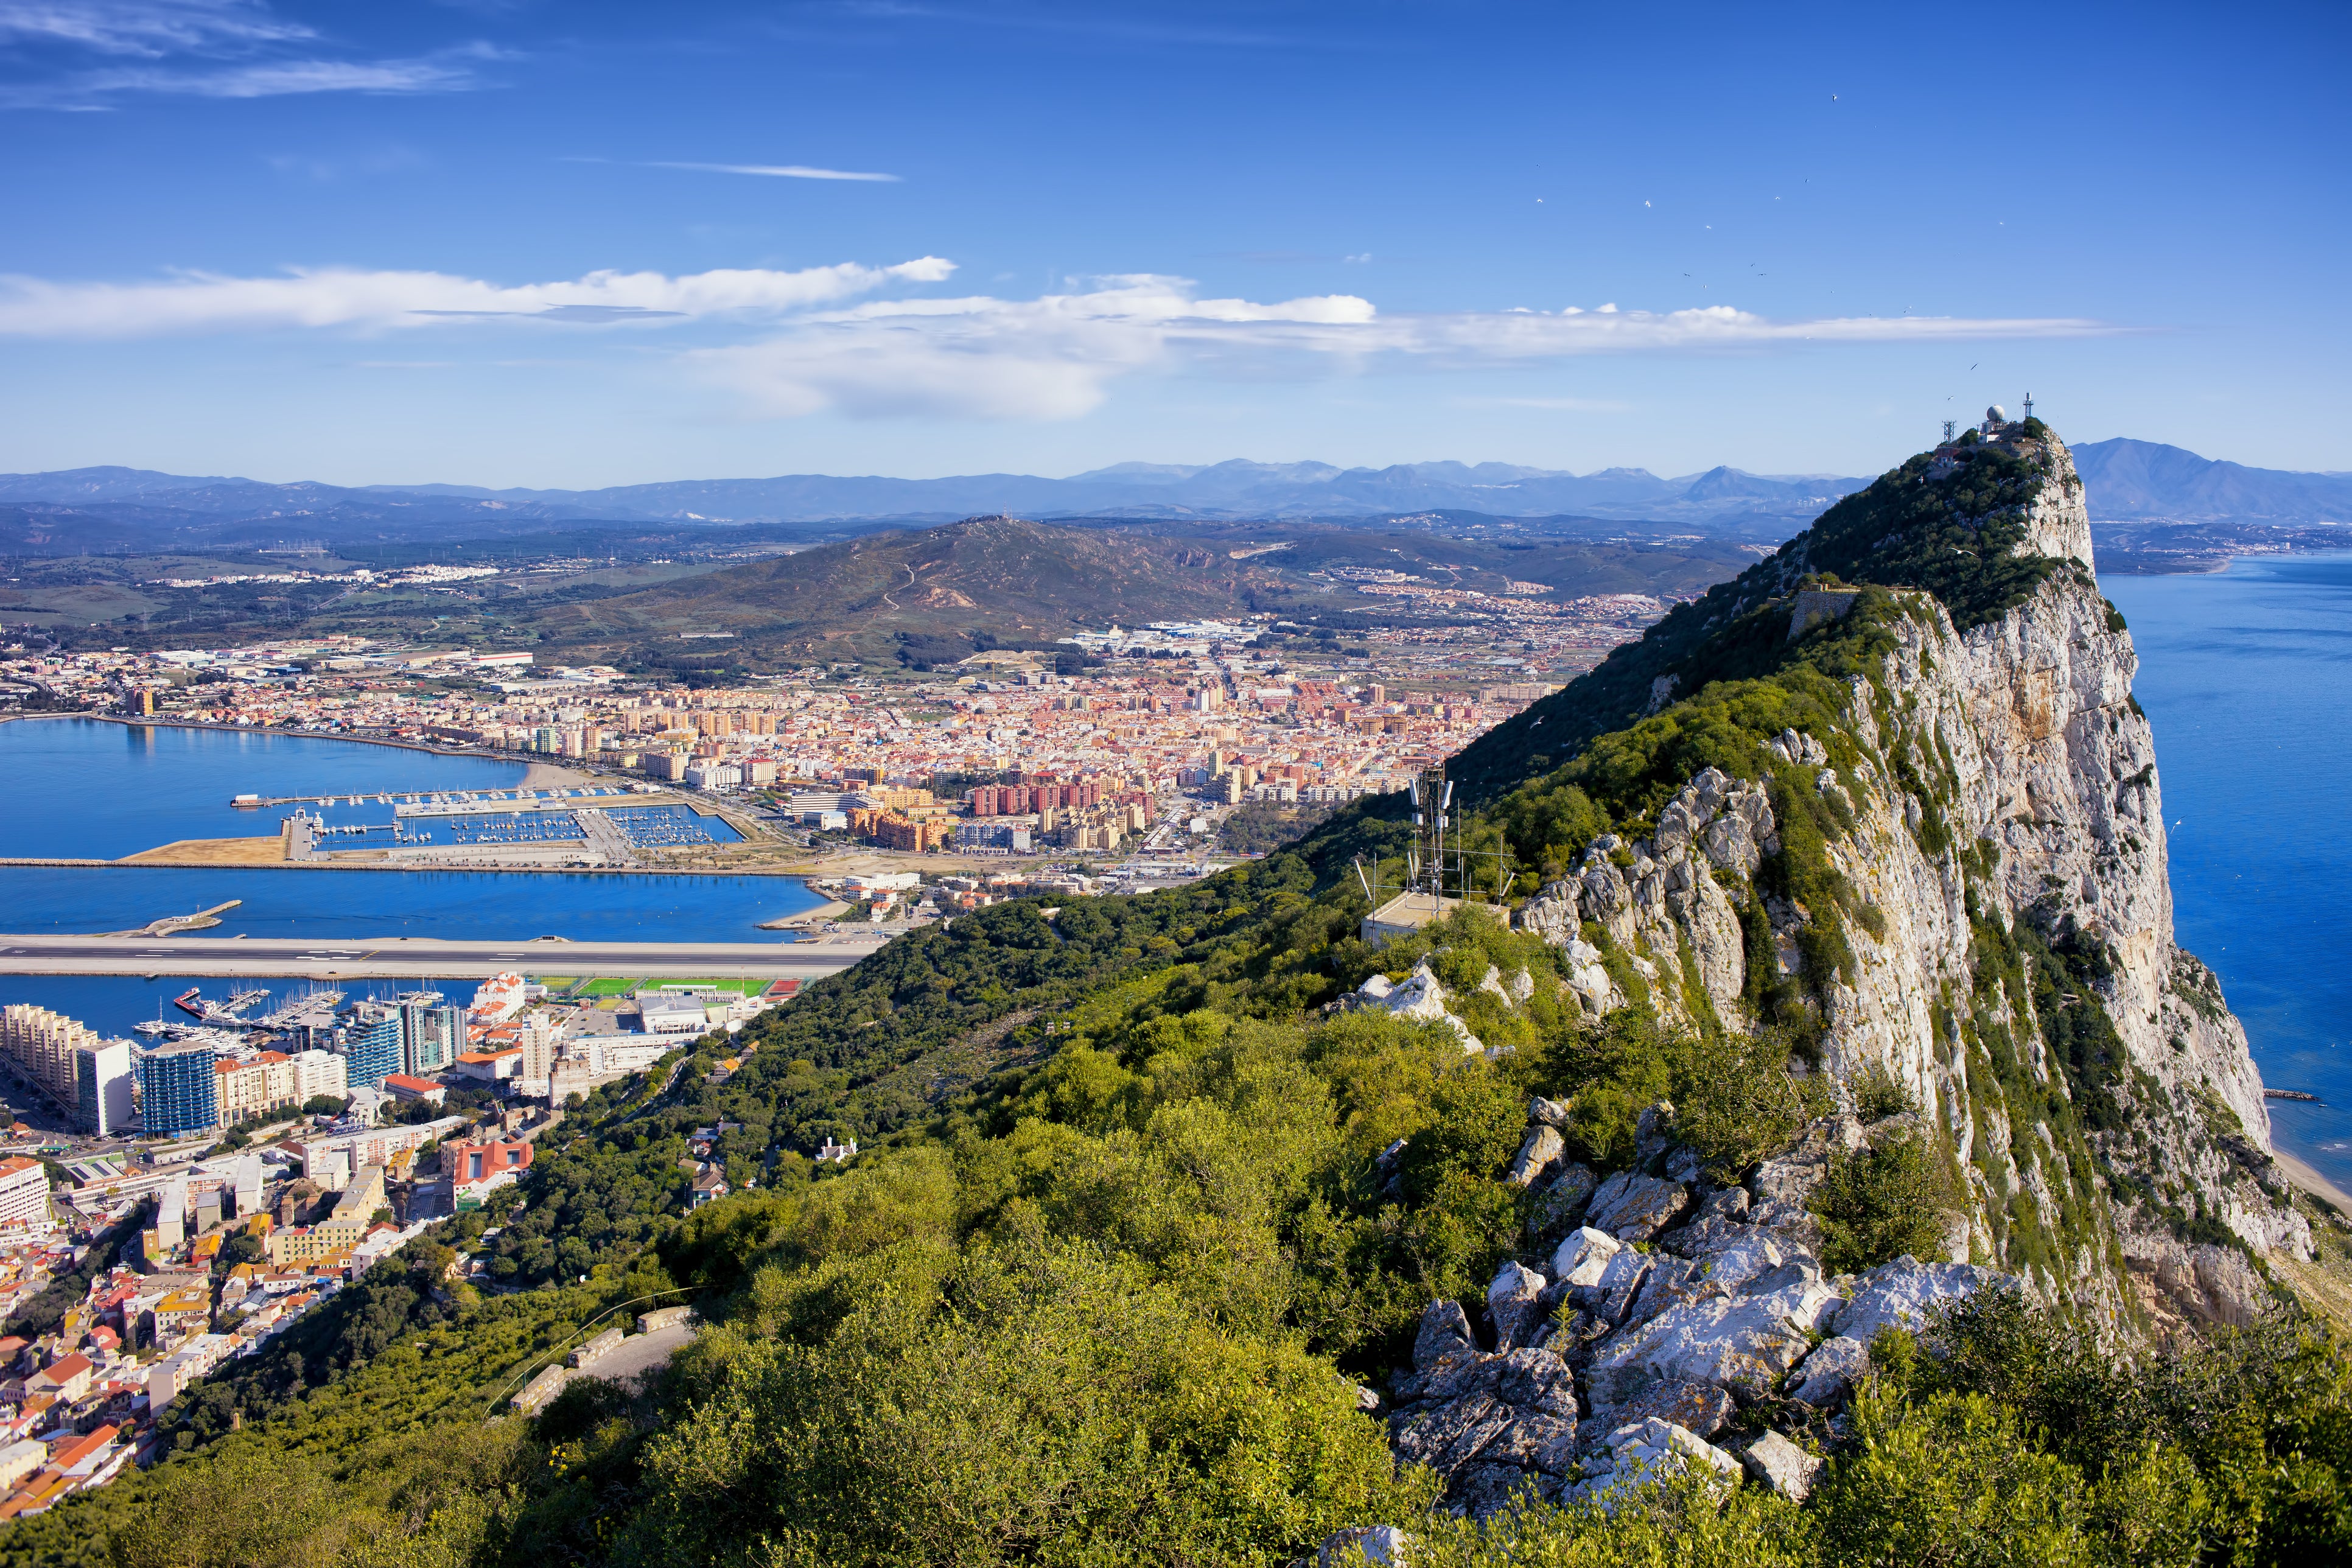 Gibraltar is a British Overseas Territory and city located at the southern tip of the Iberian Peninsula